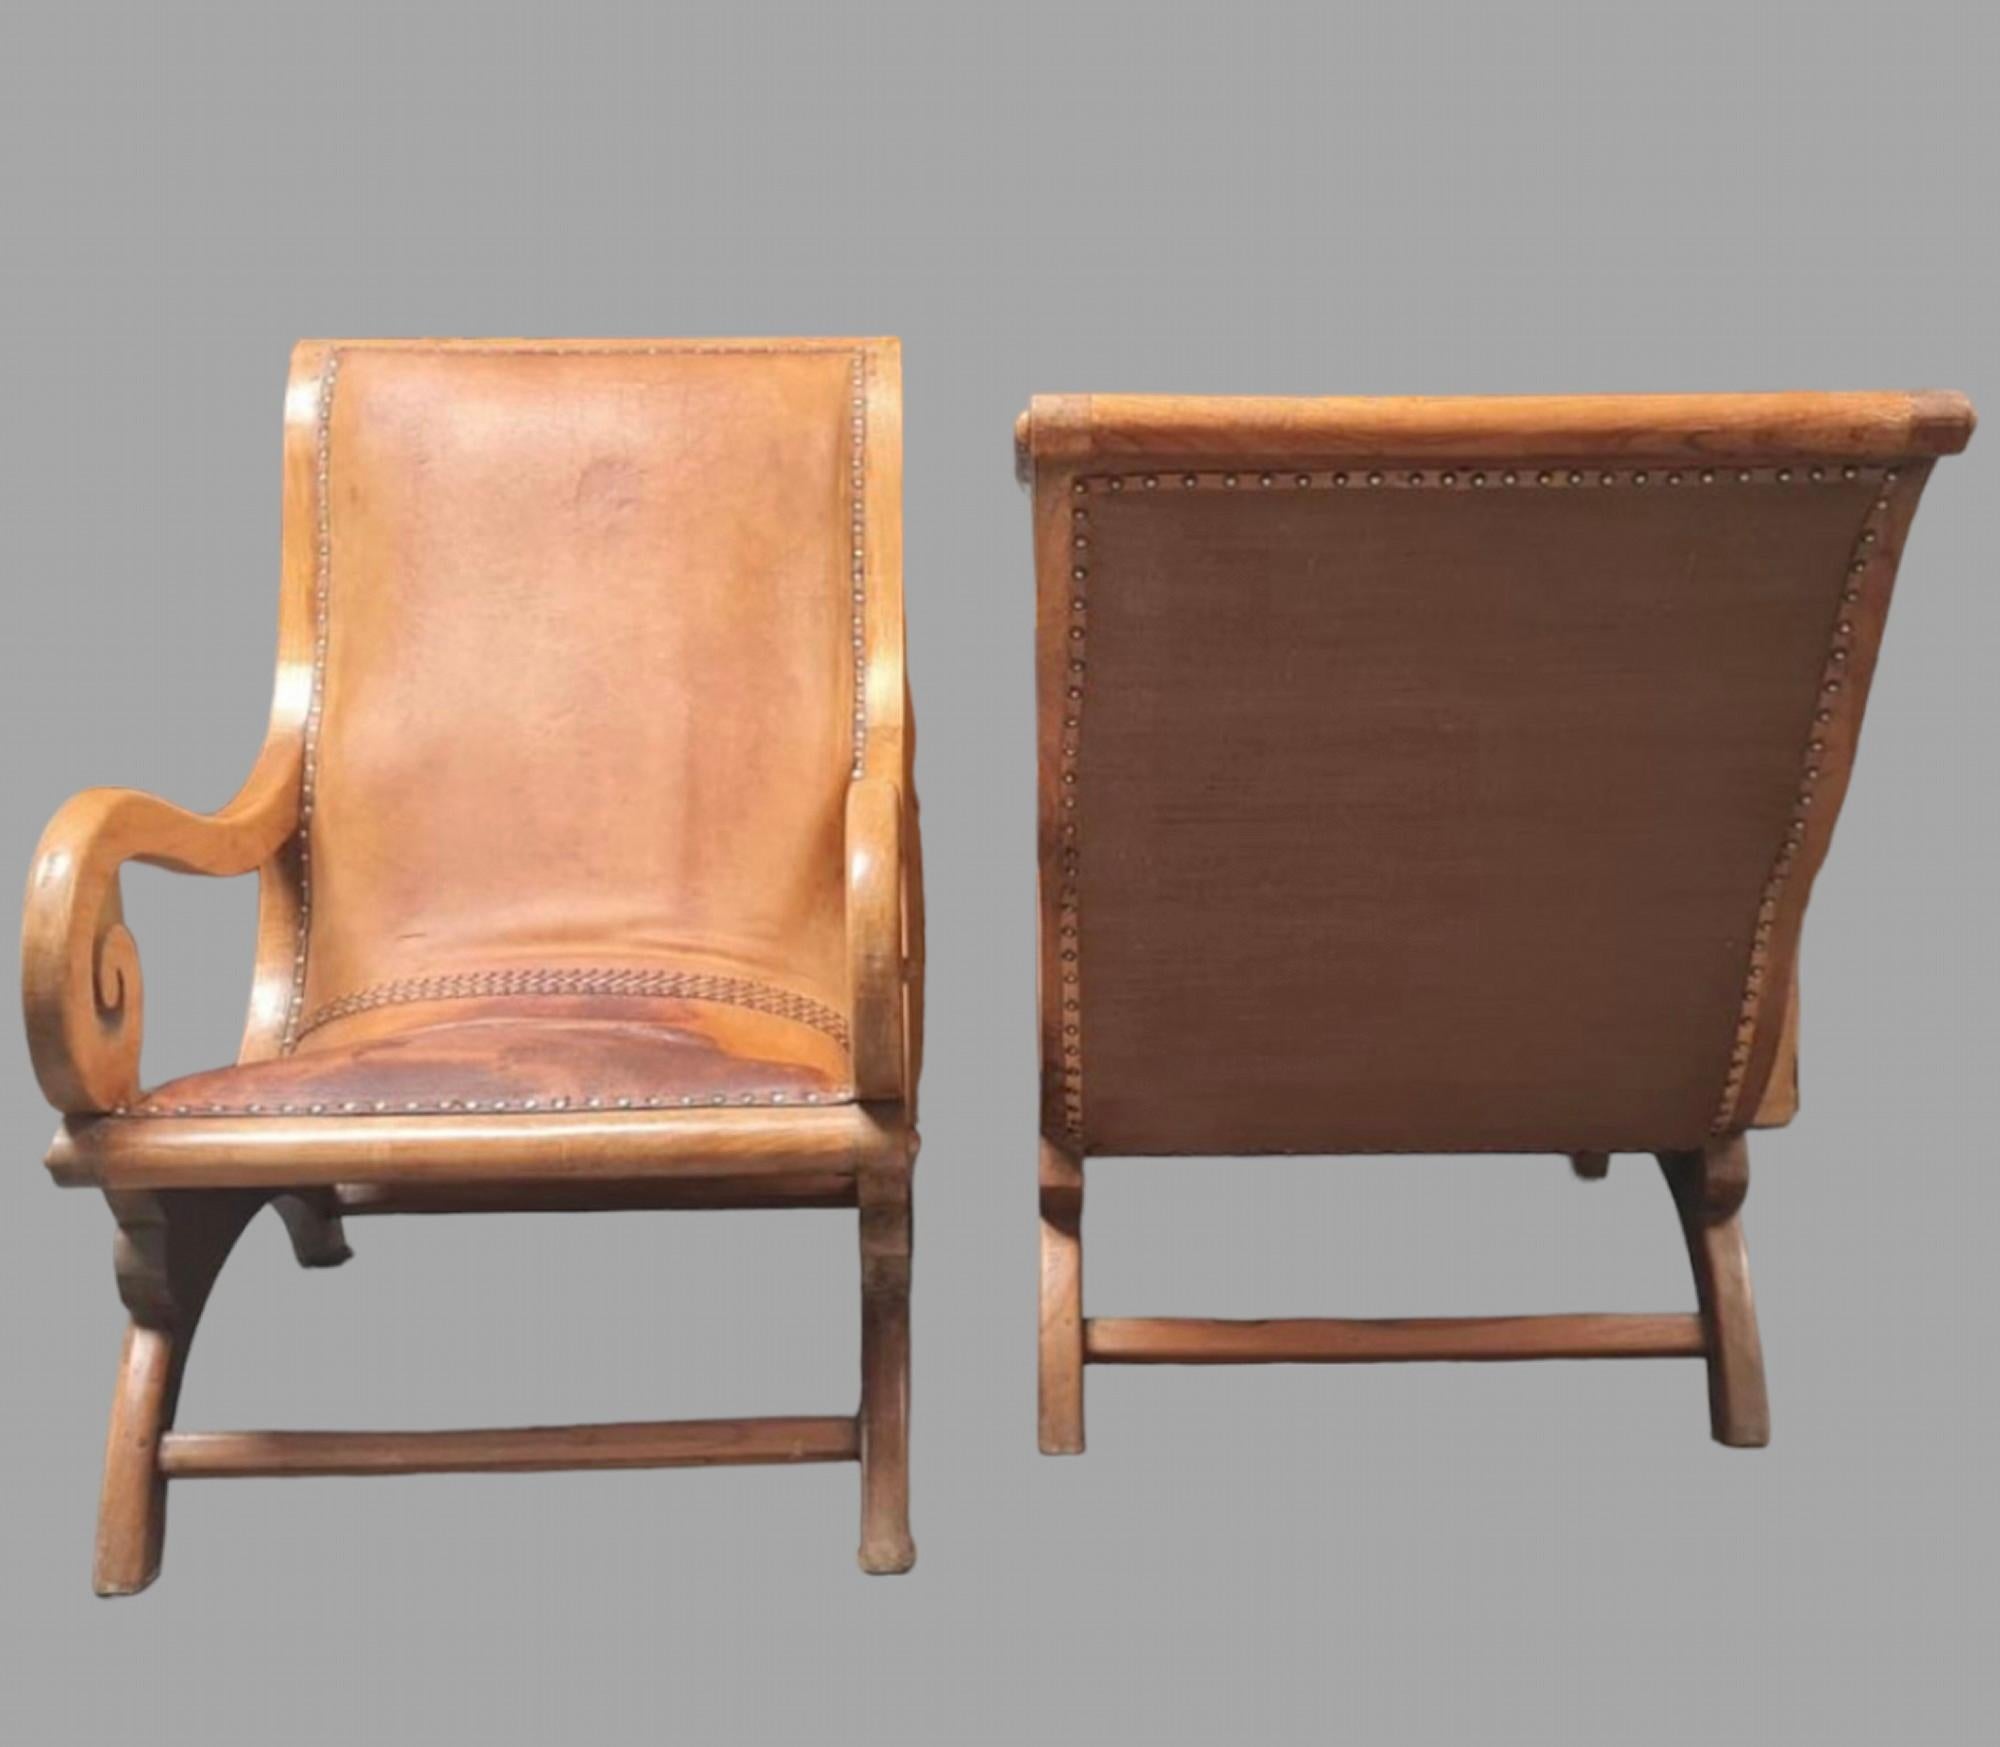 A Pair of Very Attractive Plantation Fruitwood c1900 Armchairs with scrolling arms upholstered in studded tan leather and professionally upholstered matching hessian backs.